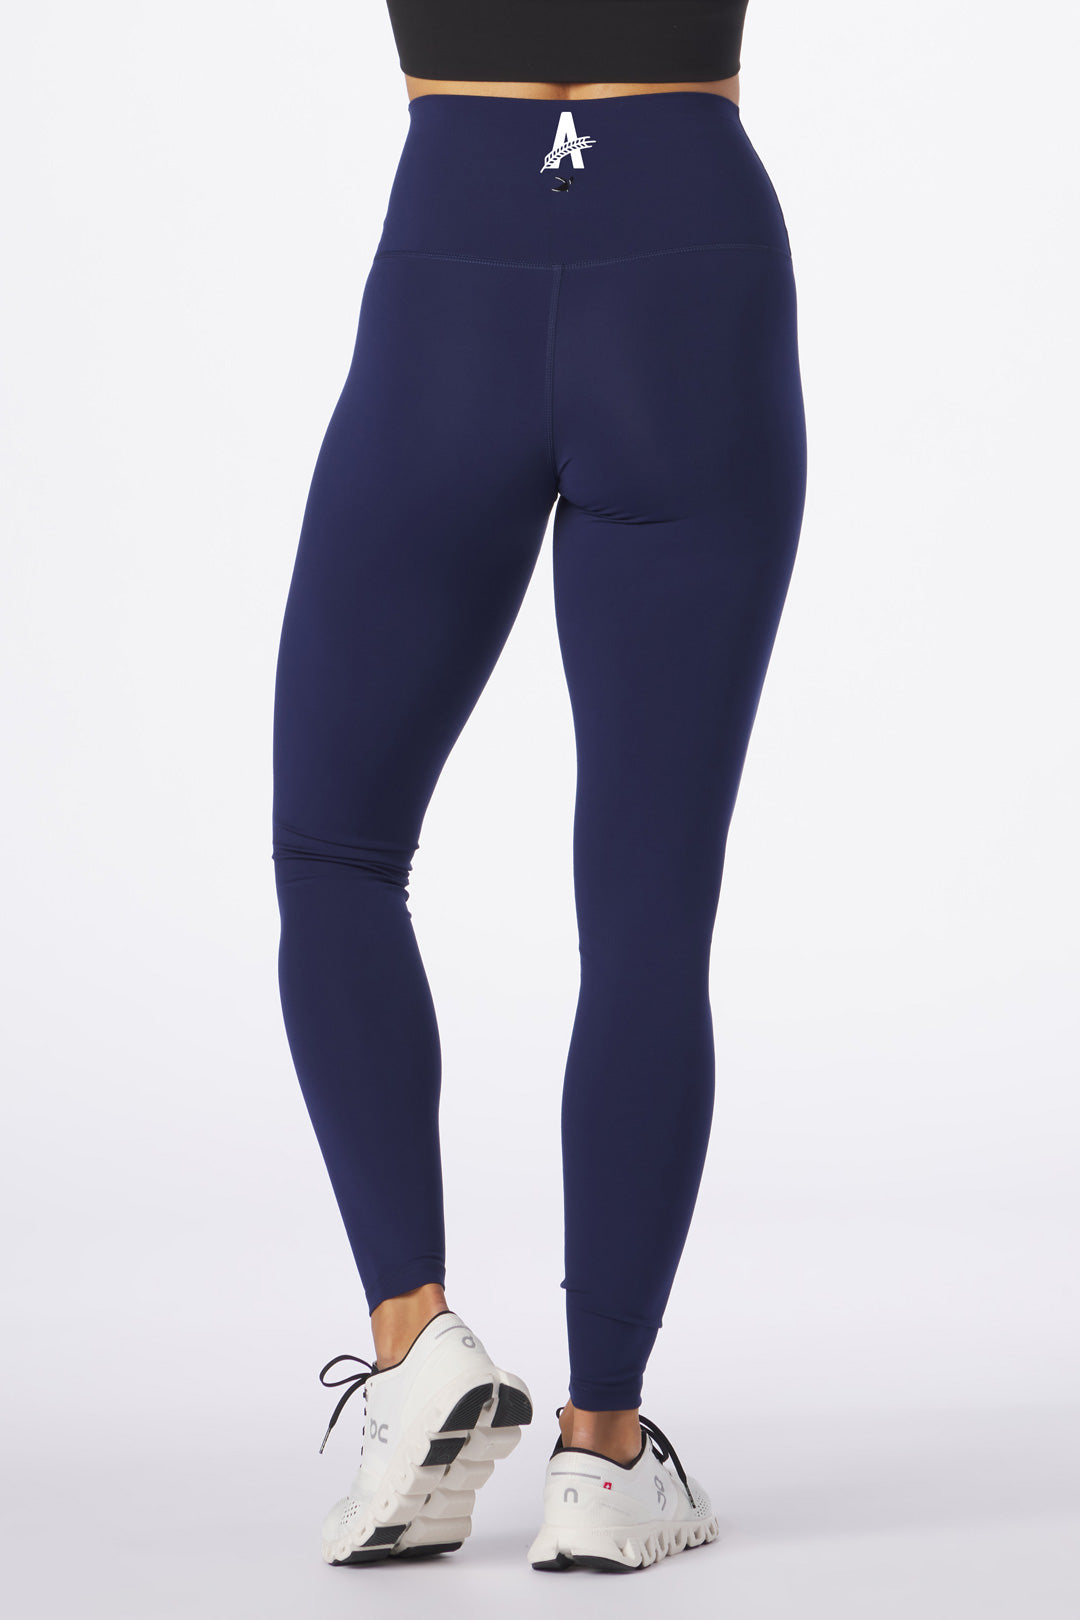 Glyder Apparel Sultry Legging (m) and Sports bra (L) set In Oatmeal Swirl  NWT Size M - $86 New With Tags - From Curtsy